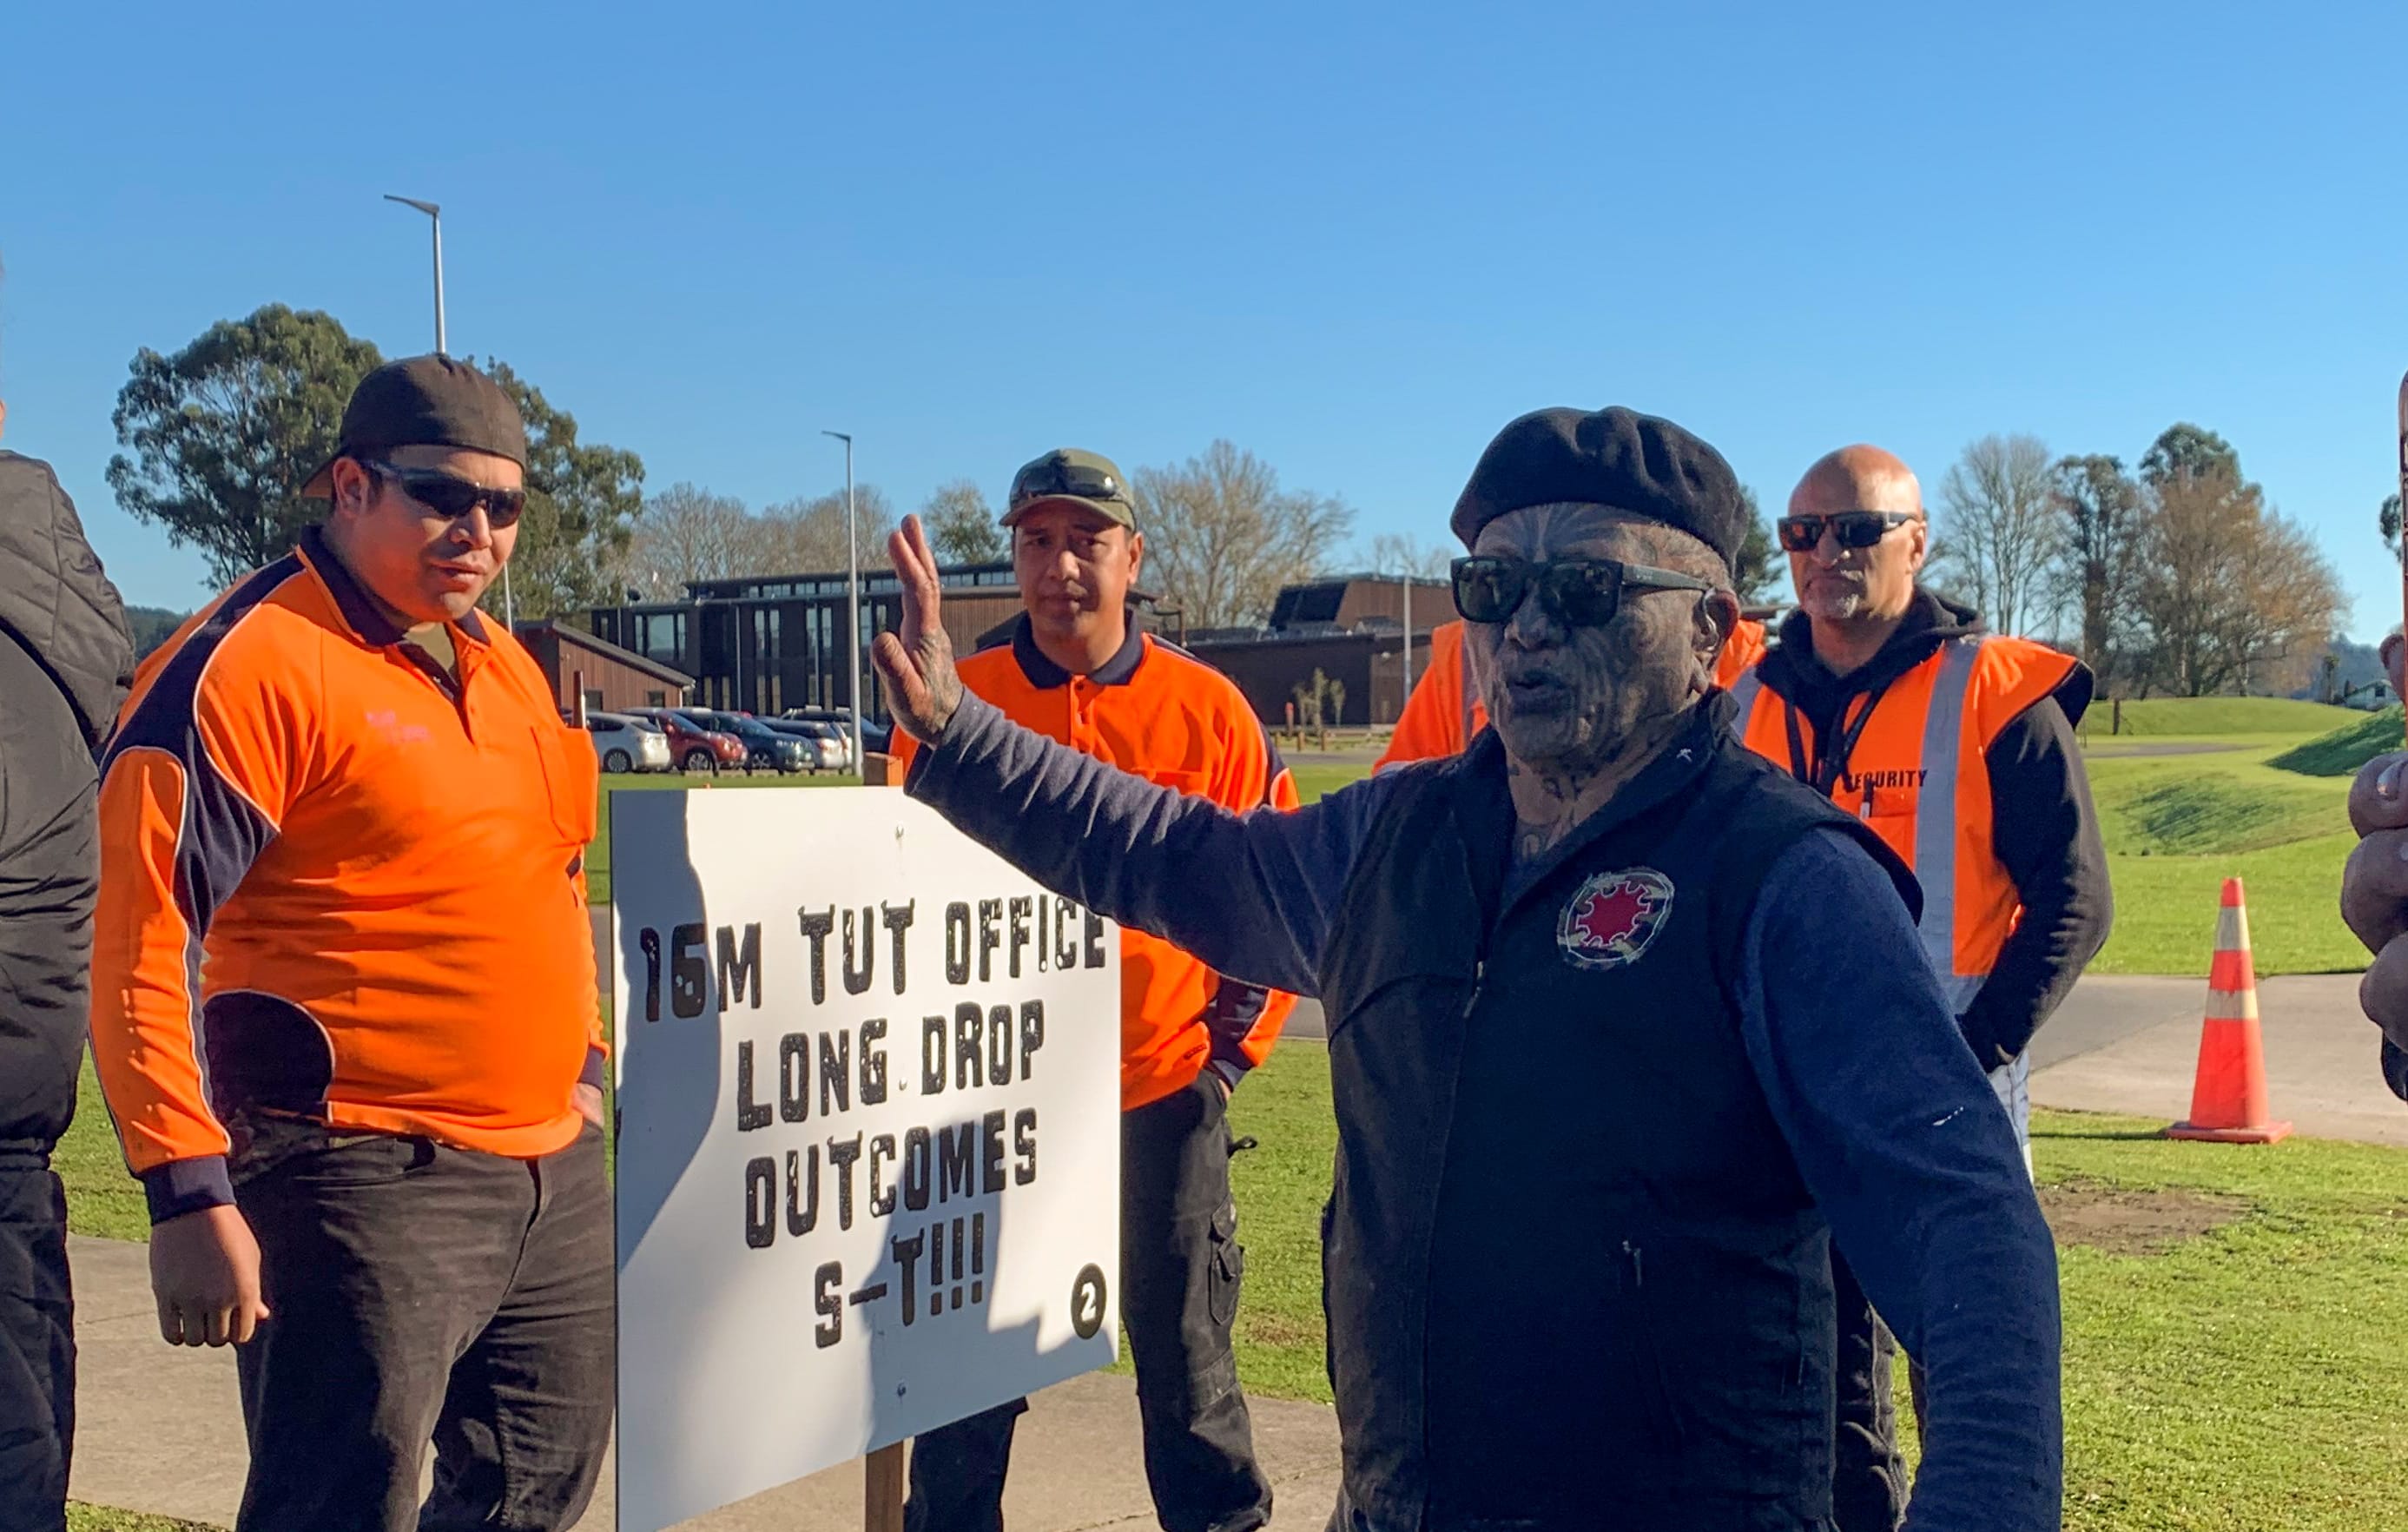 Tuhoe artist Tame Iti dismisses security guards after a tense discussion over people’s right to protest.